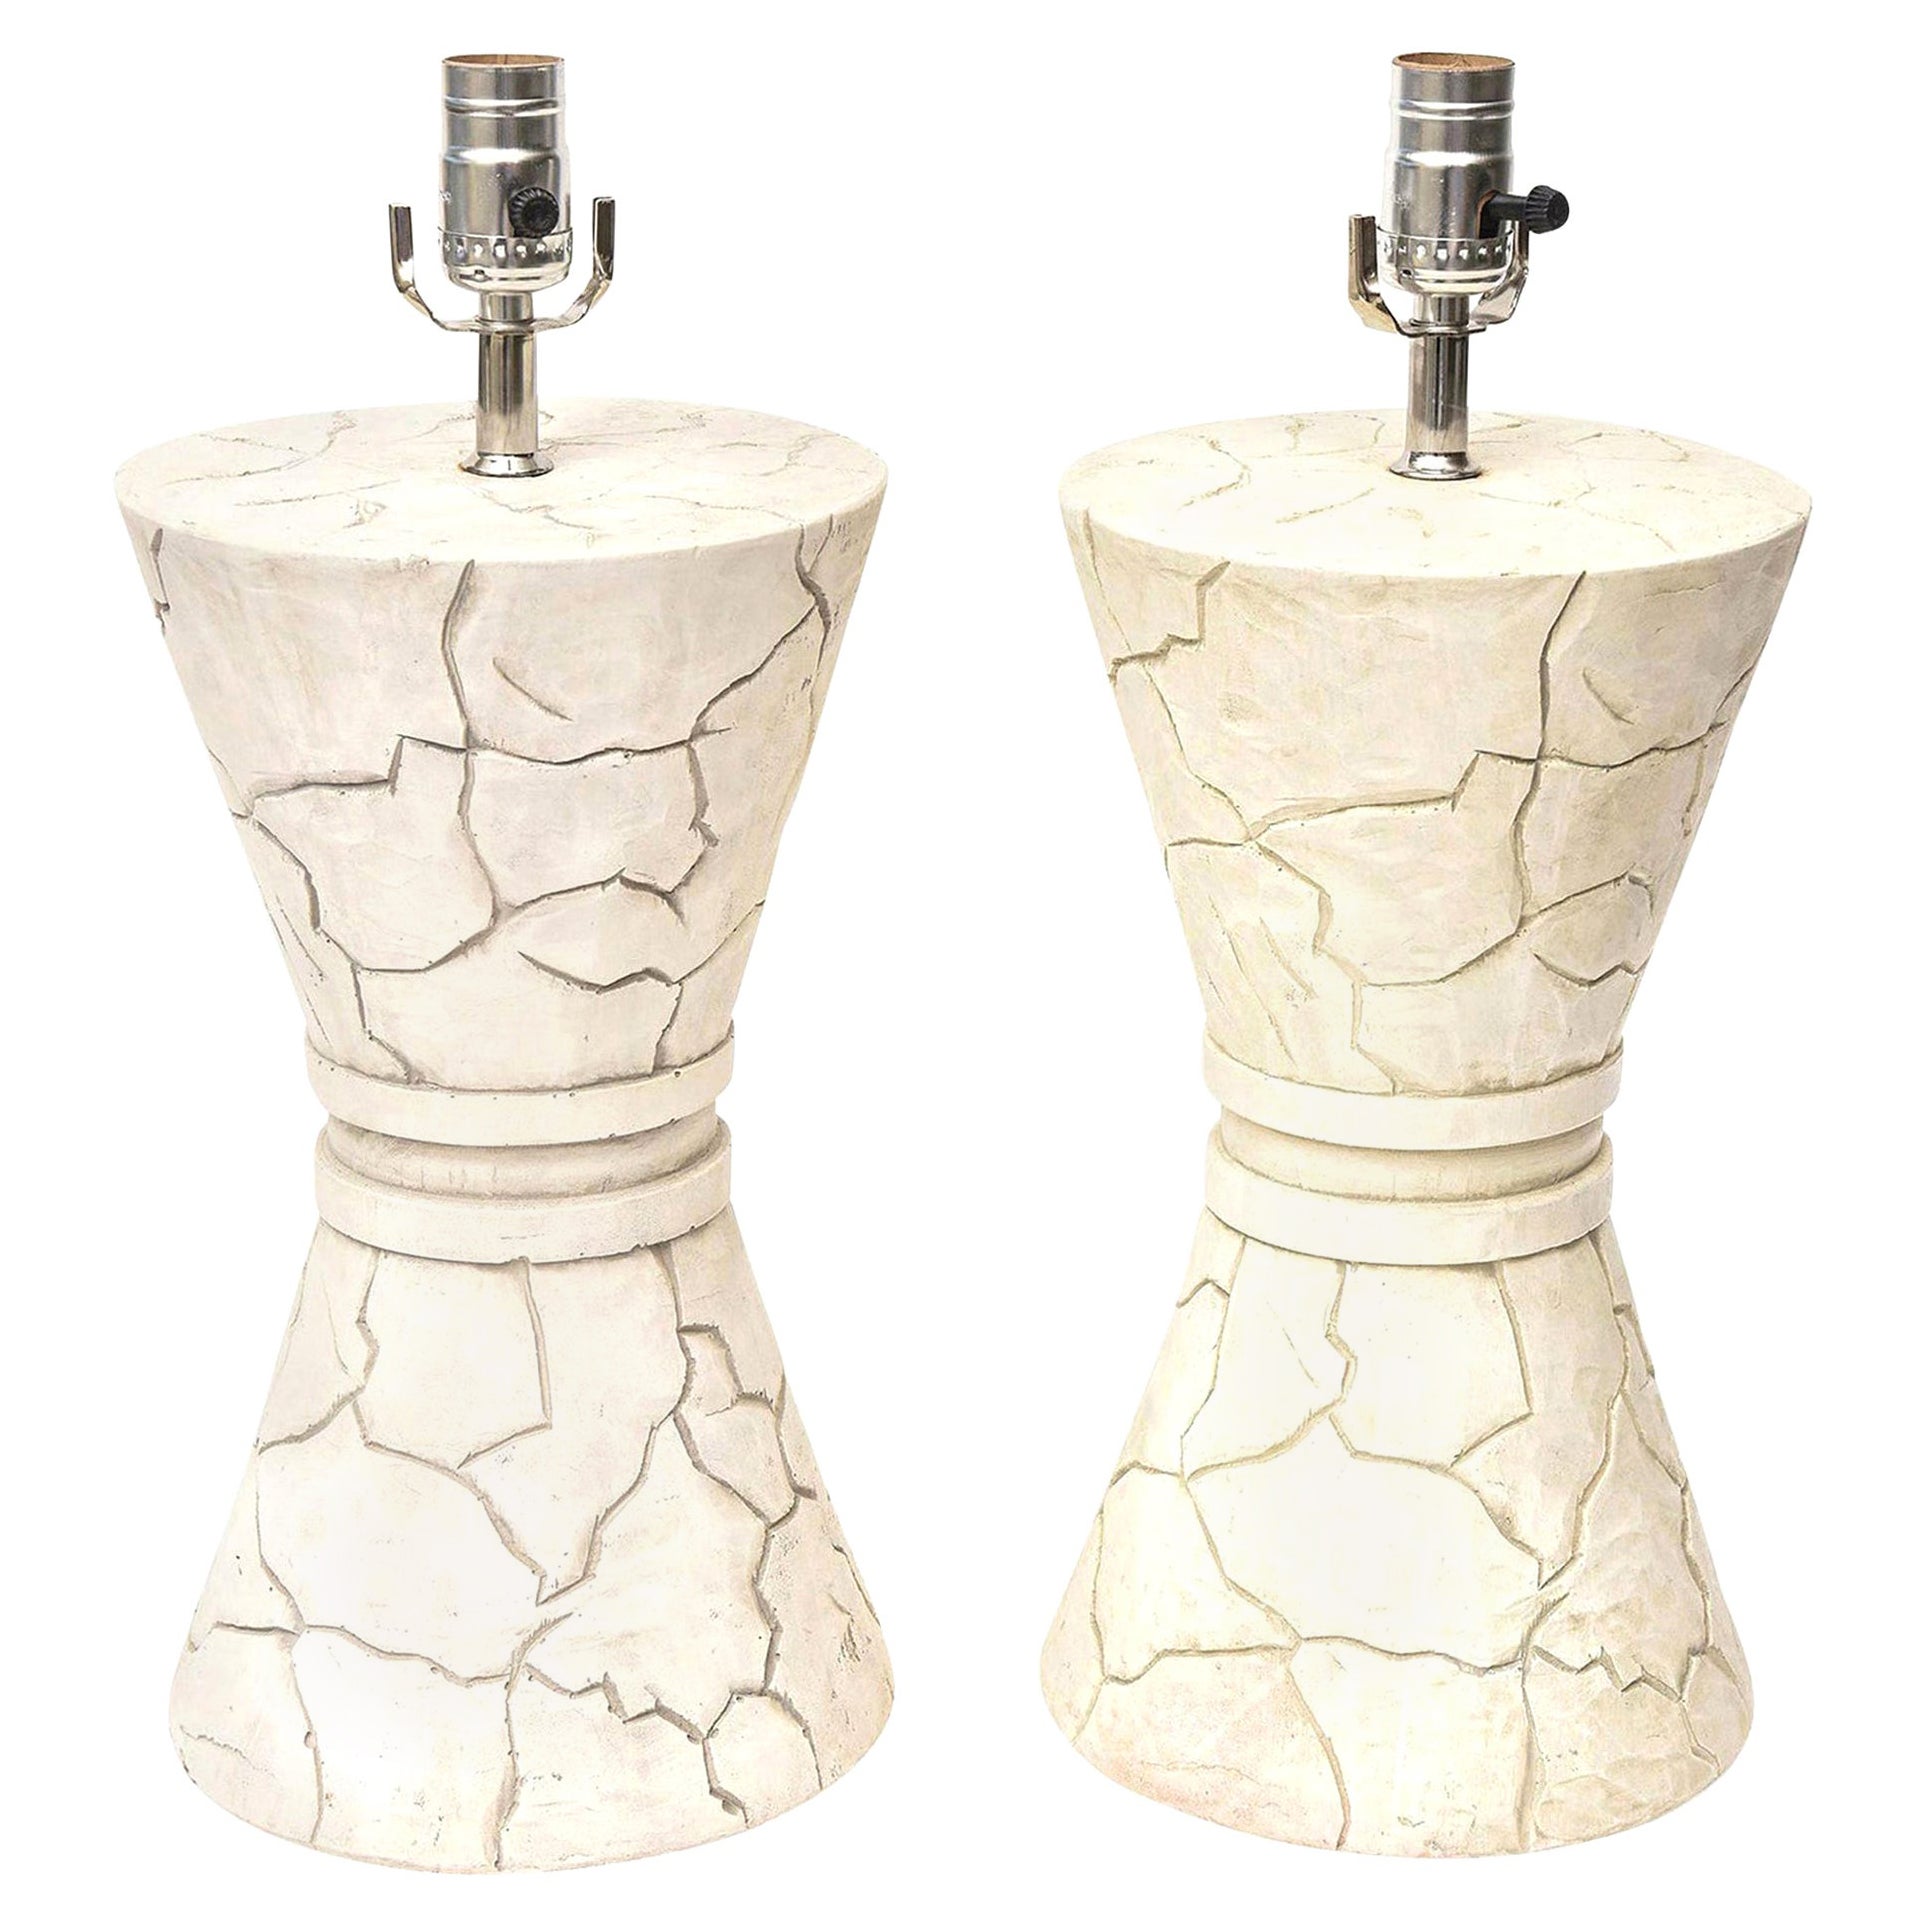 Vintage Organic Modern Ceramic Pebbled Off White Signed Japanese Lamps Pair Of